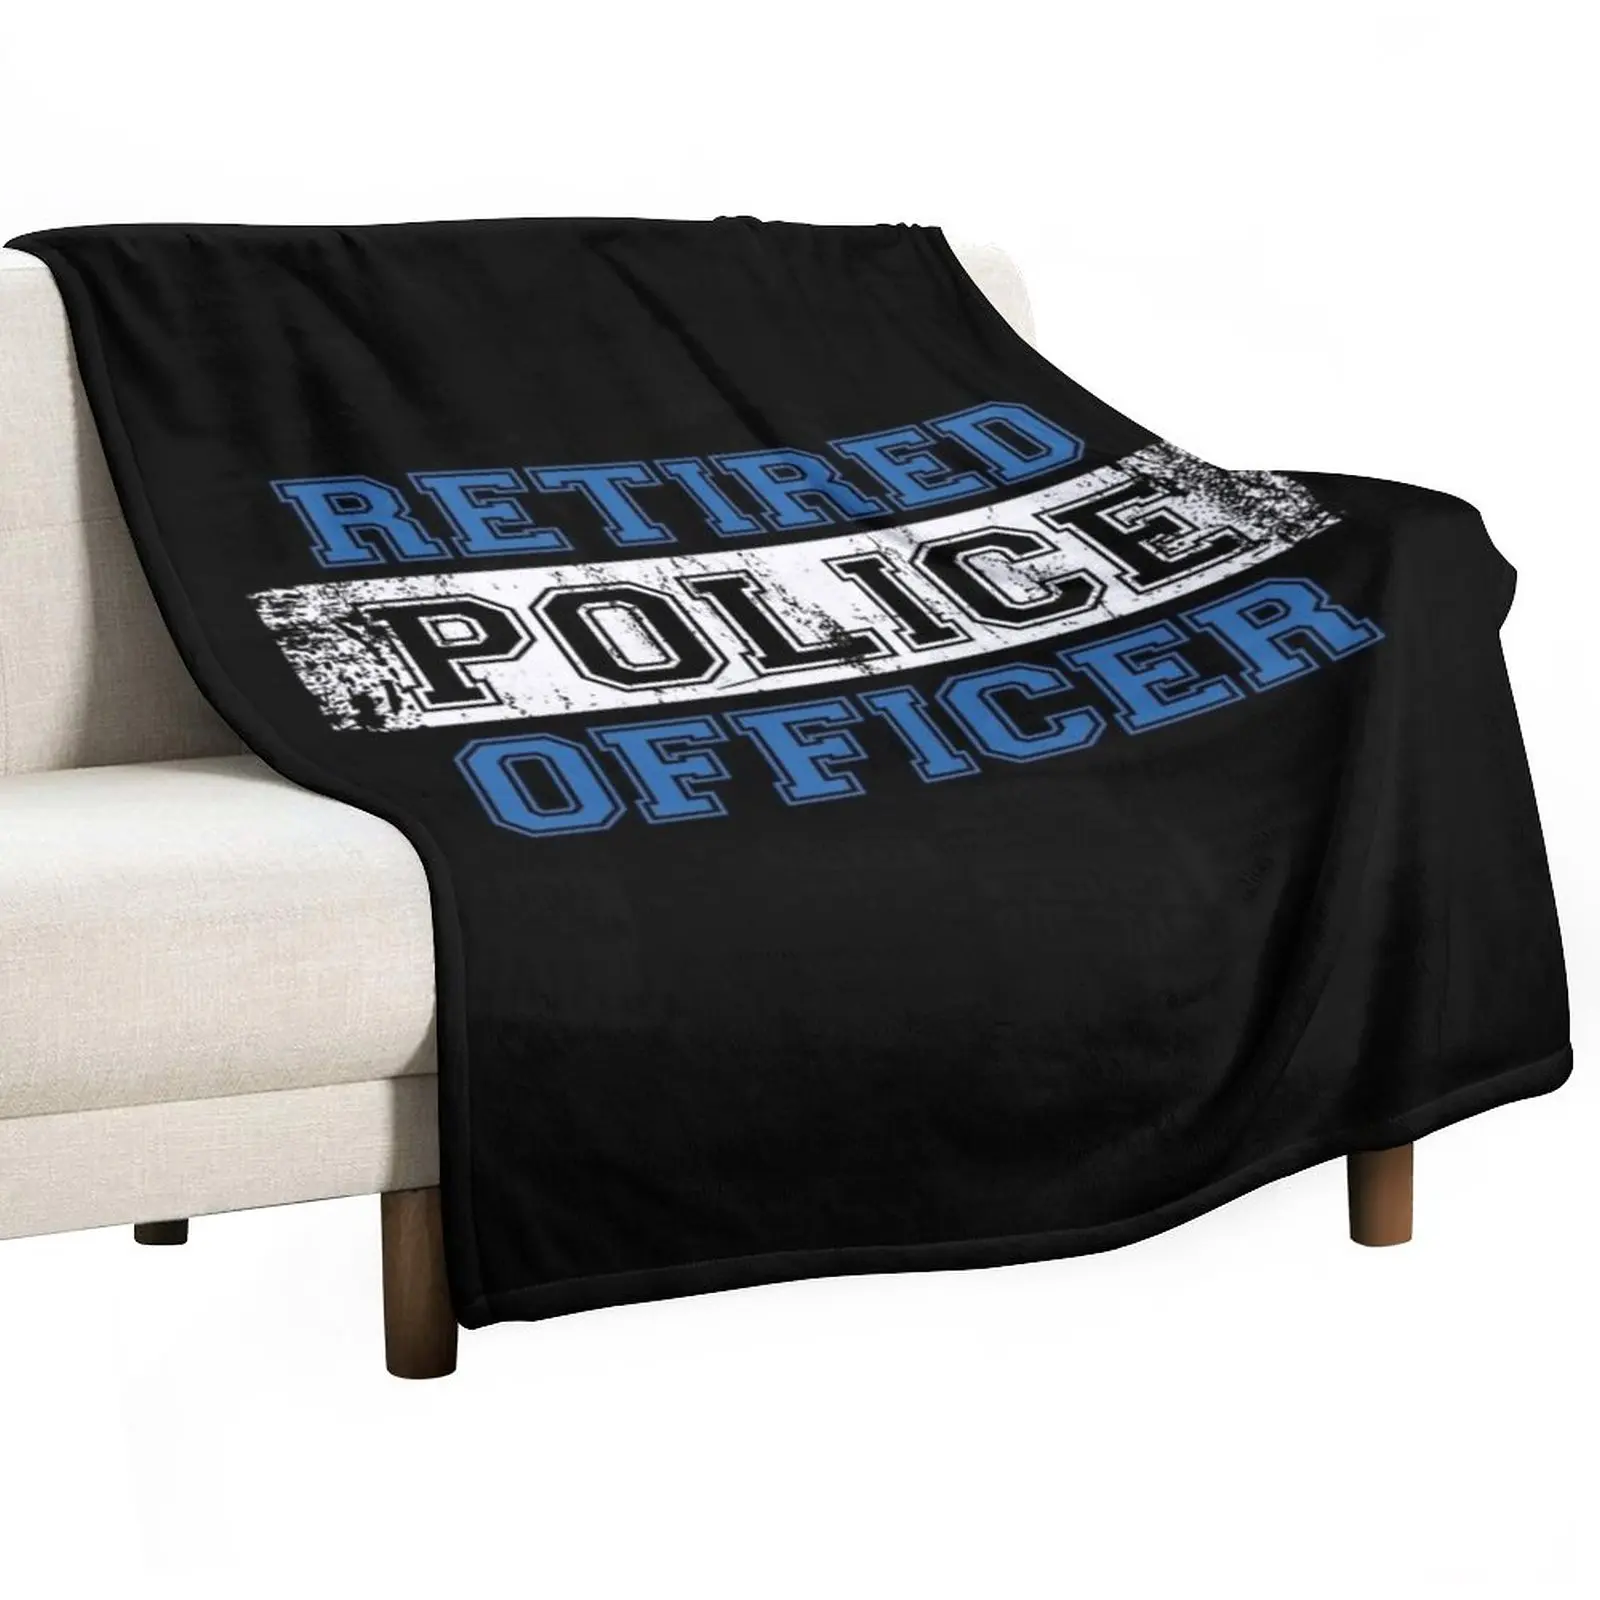 

Retired Police Officer Gift for Retirement Party Throw Blanket Decorative Sofa Blankets blankets and throws